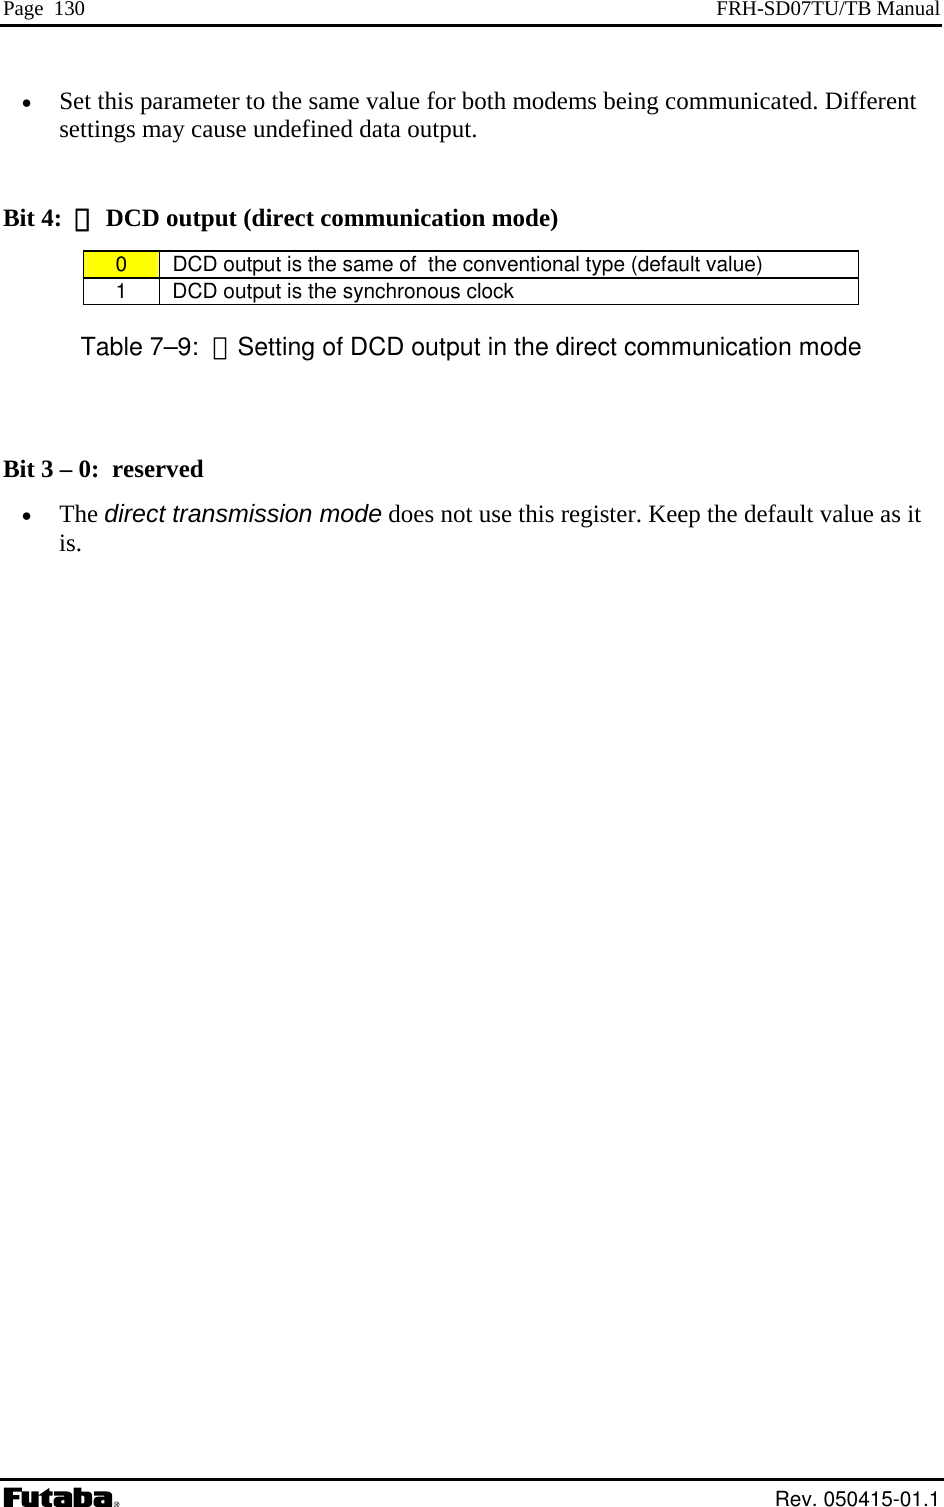 Page  130  FRH-SD07TU/TB Manual •  Set this parameter to the same value for both modems being communicated. Differentsettings may cause undefined data output.    Bit 4:  ： DCD output (direct communication mode) 0   DCD output is the same of  the conventional type (default value) 1   DCD output is the synchronous clock Table 7–9:  ：Setting of DCD output in the direct communication mode  Bit 3 – 0:  reserved •  The direct transmission mode does not use this register. Keep the default value as it is.   Rev. 050415-01.1 